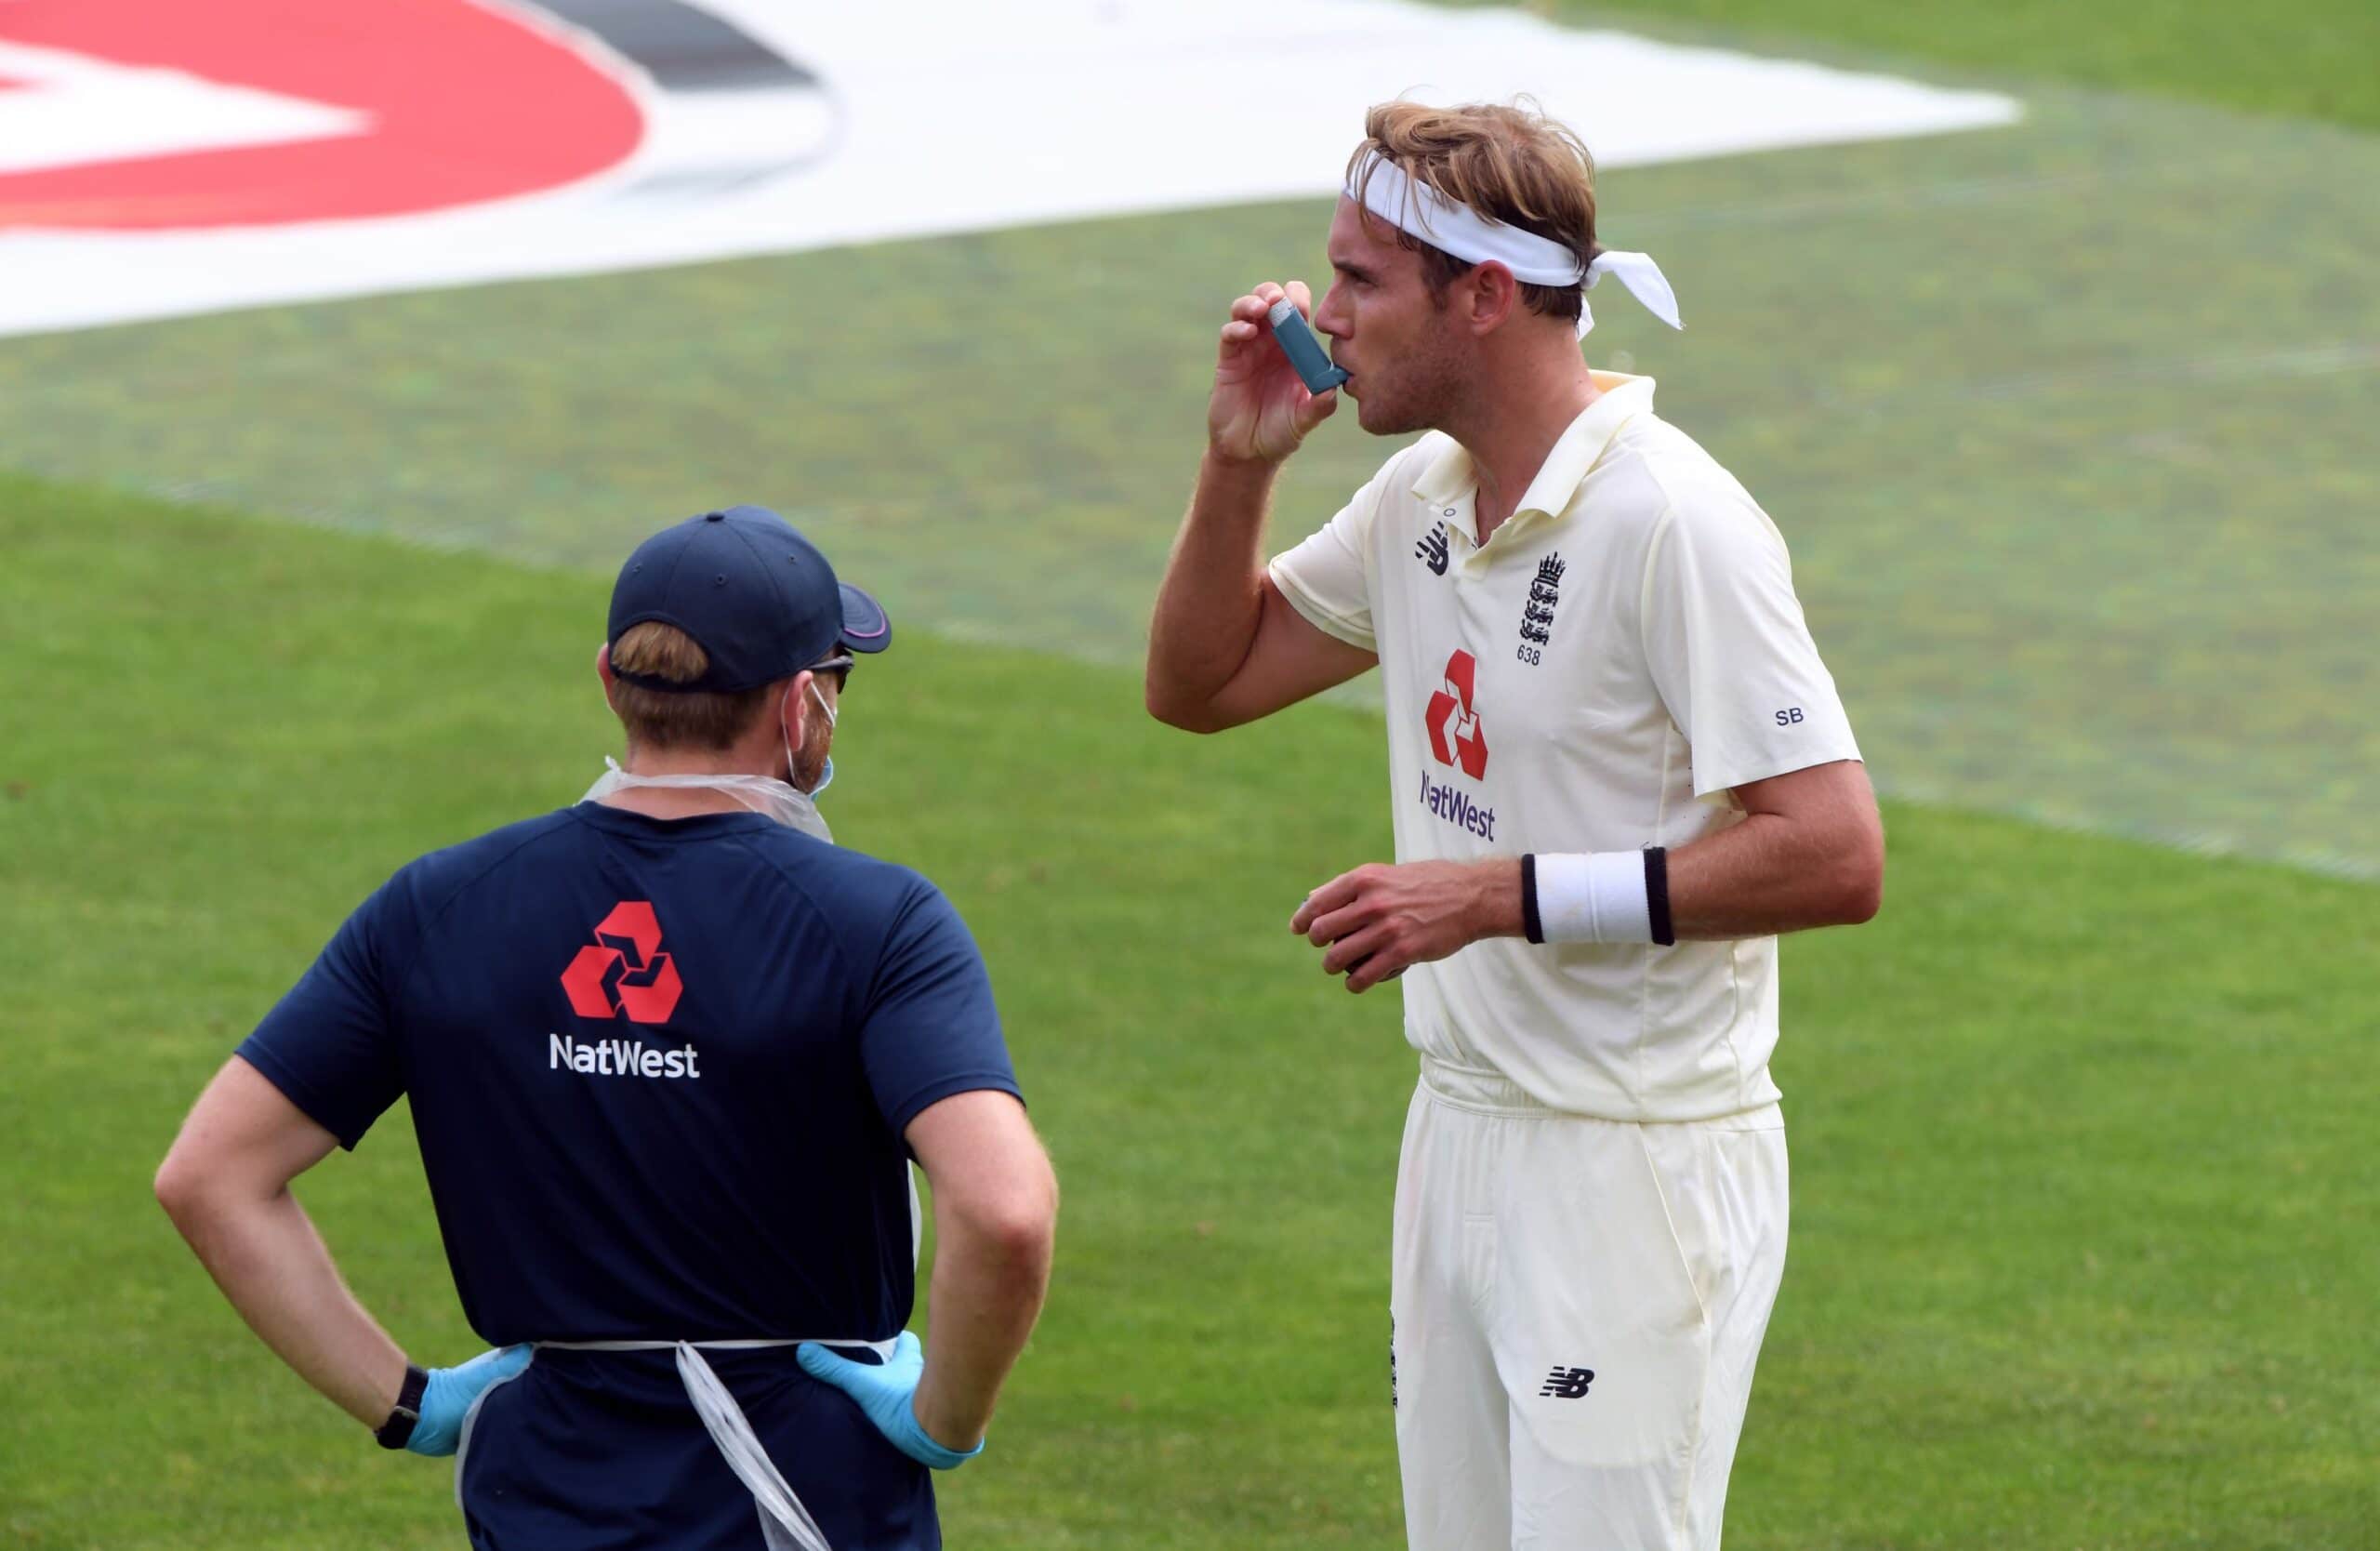 Stuart Broad On Coming To Terms With His Asthma